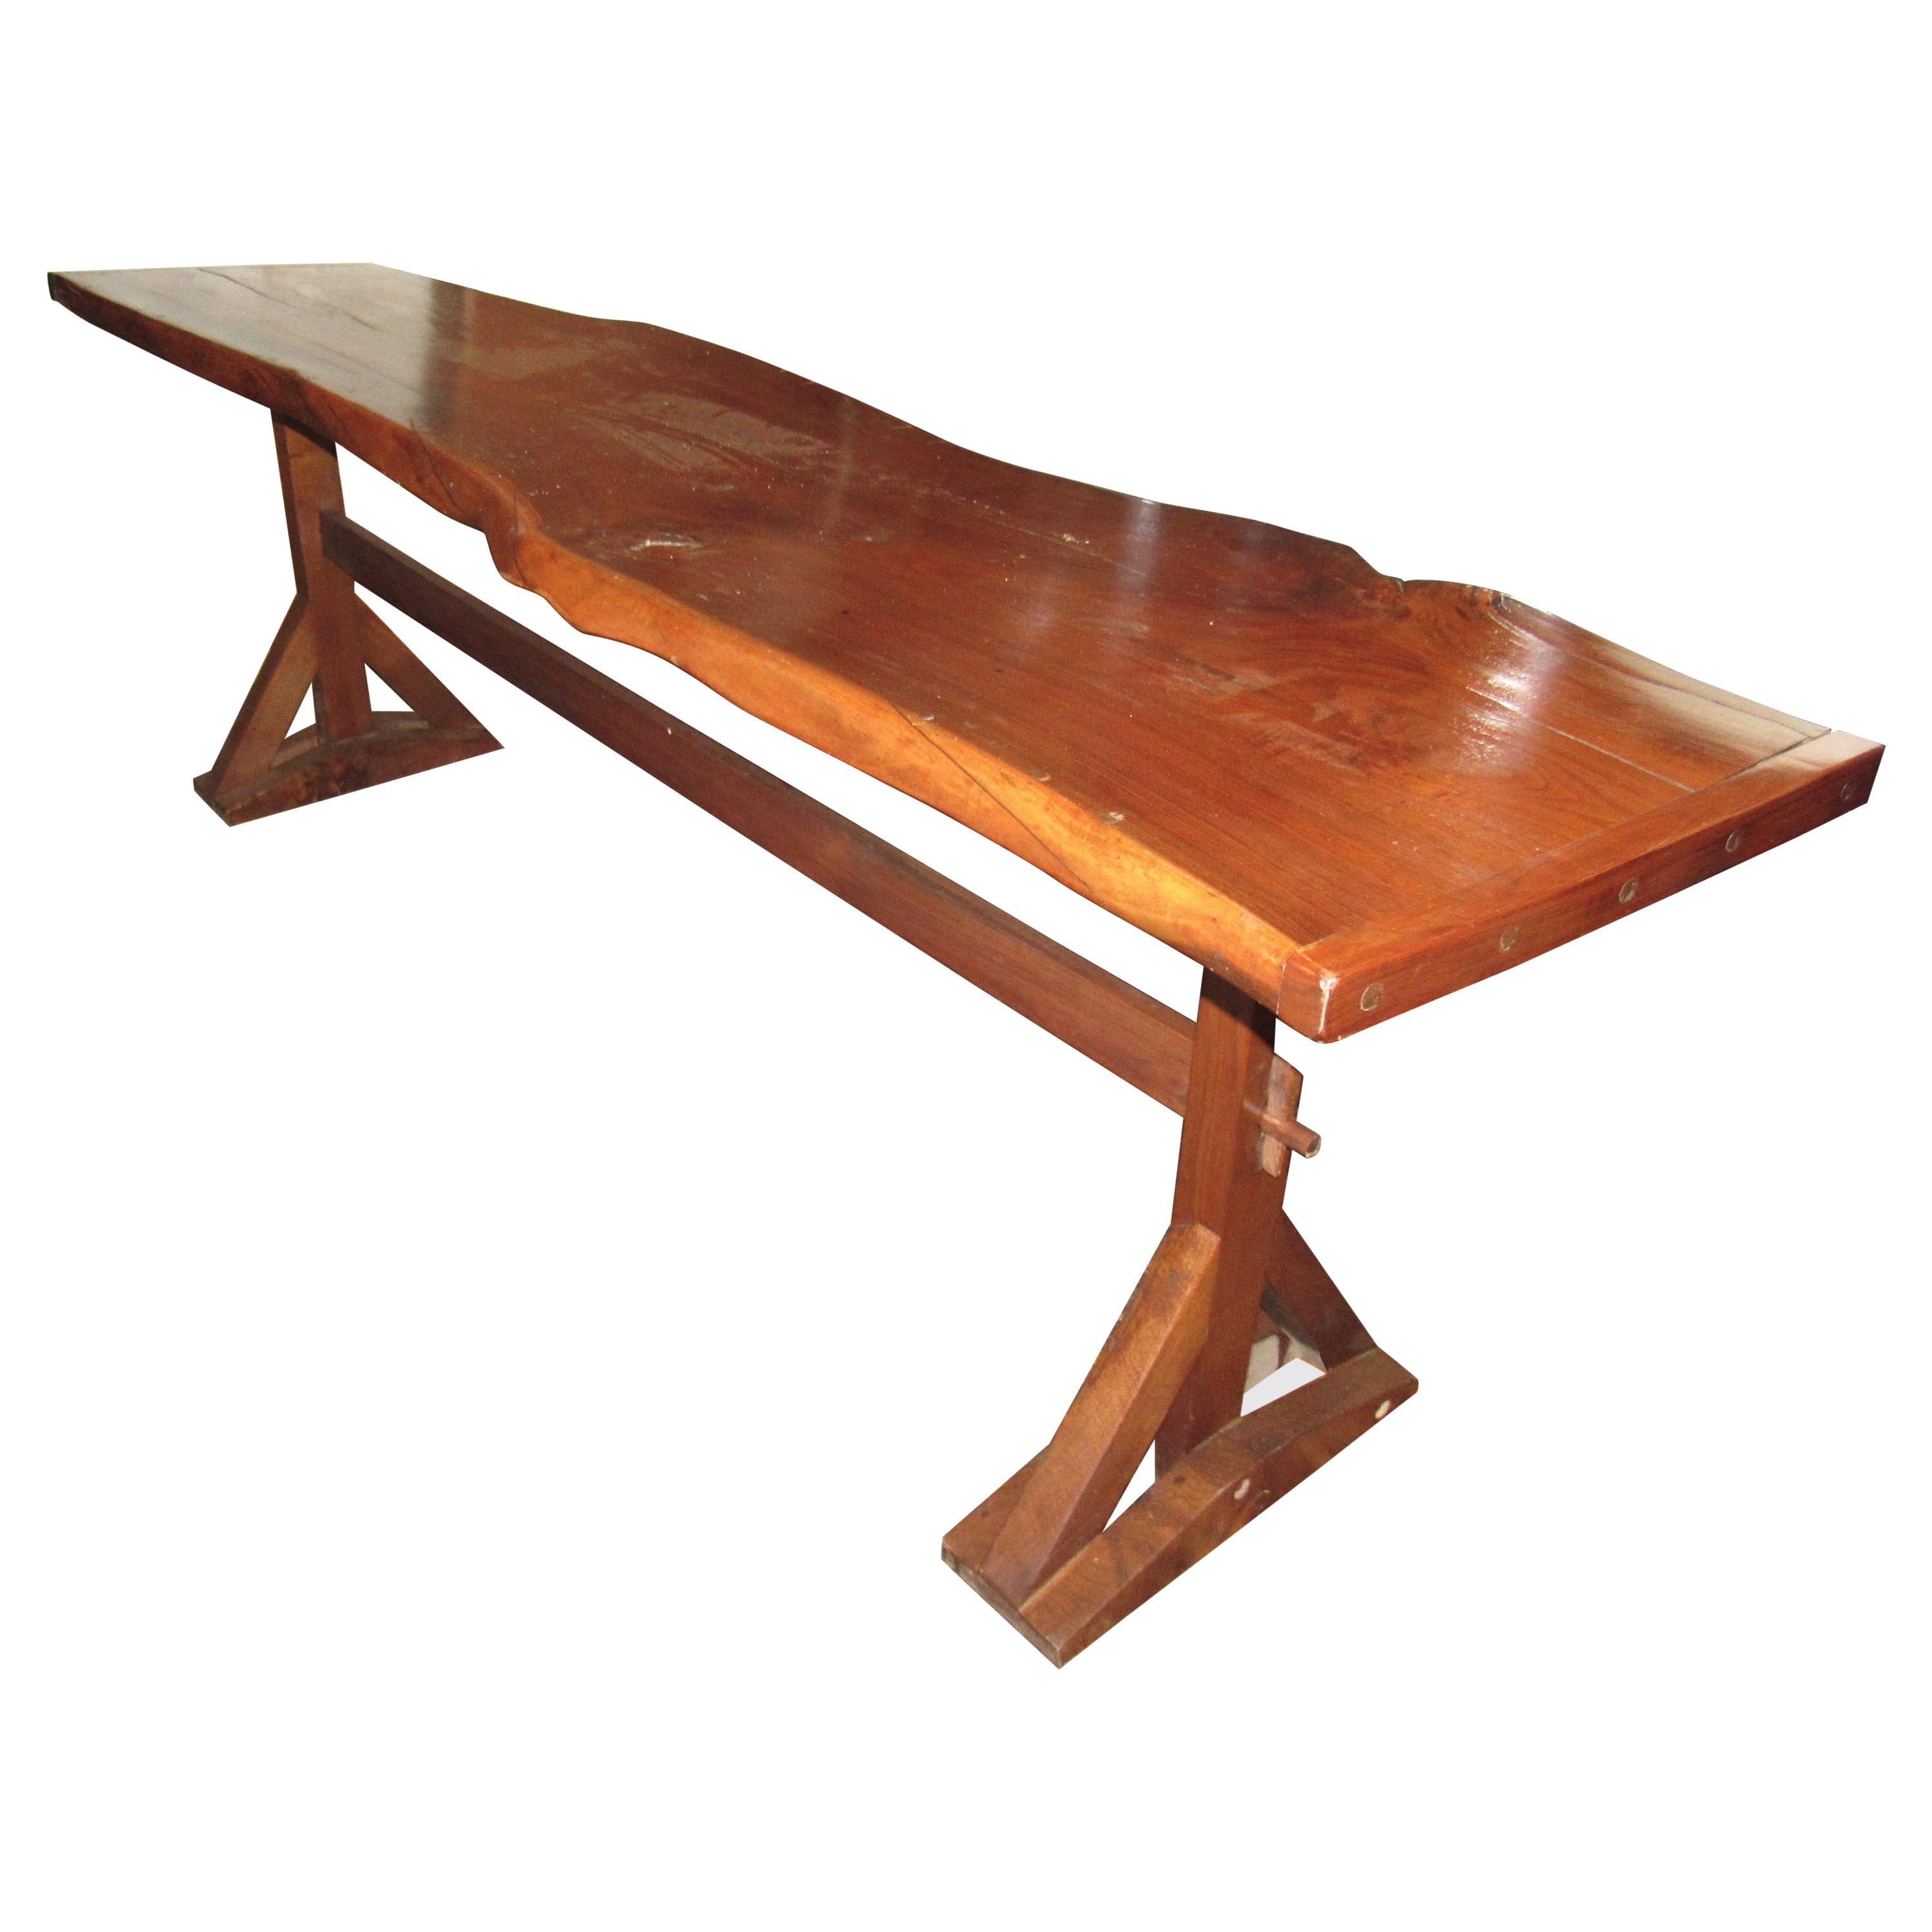 Seven Foot Long Free Form Table For Sale